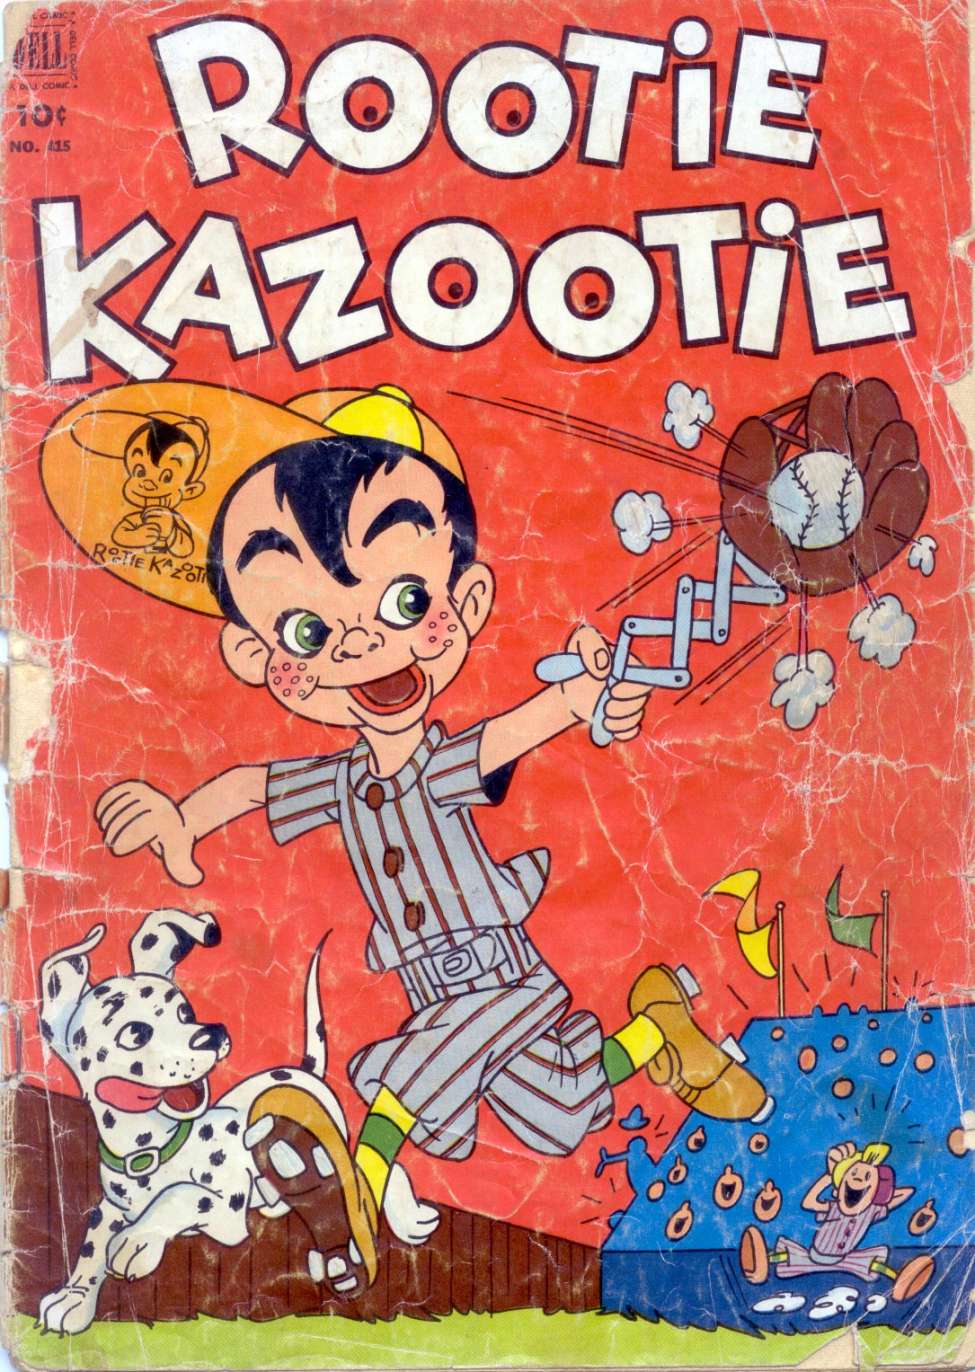 Book Cover For 0415 - Rootie Kazootie